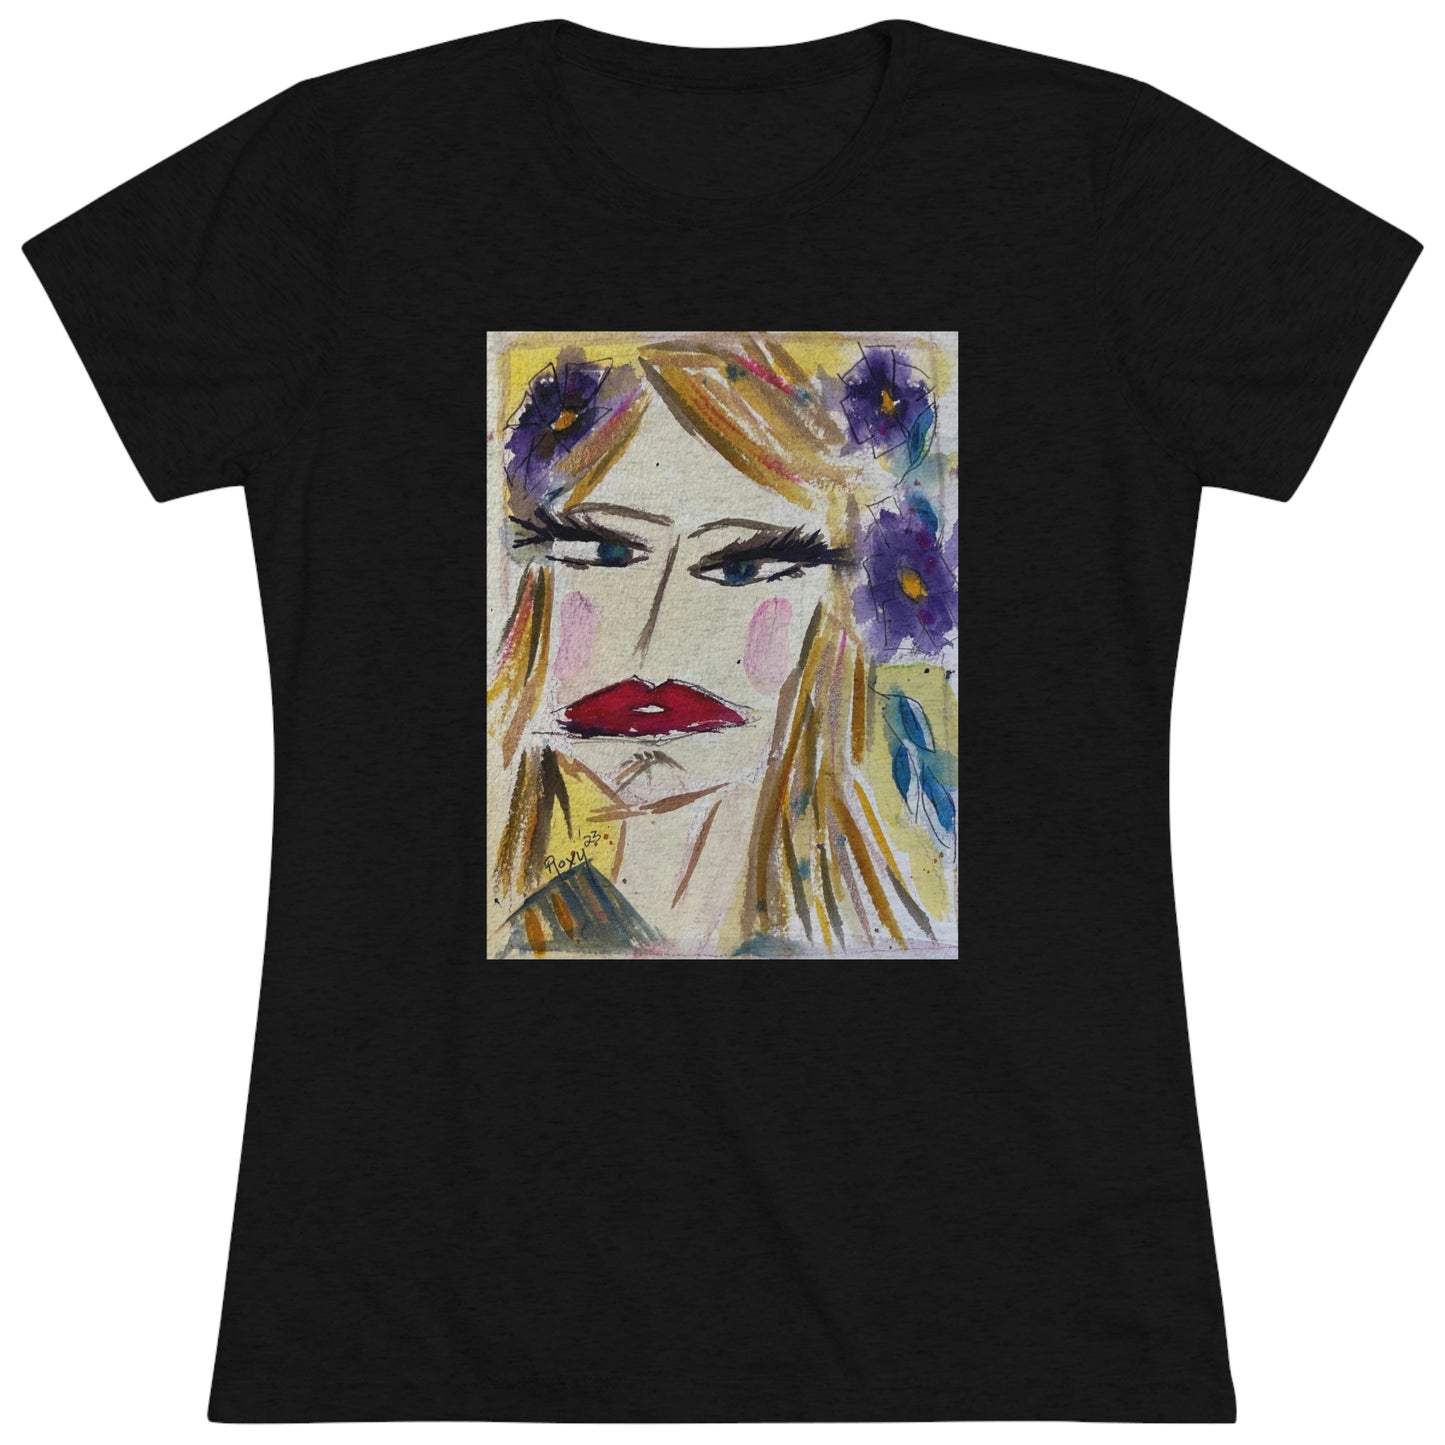 Women's fitted Triblend Tee  tee shirt  featuring "Whatever!" painting